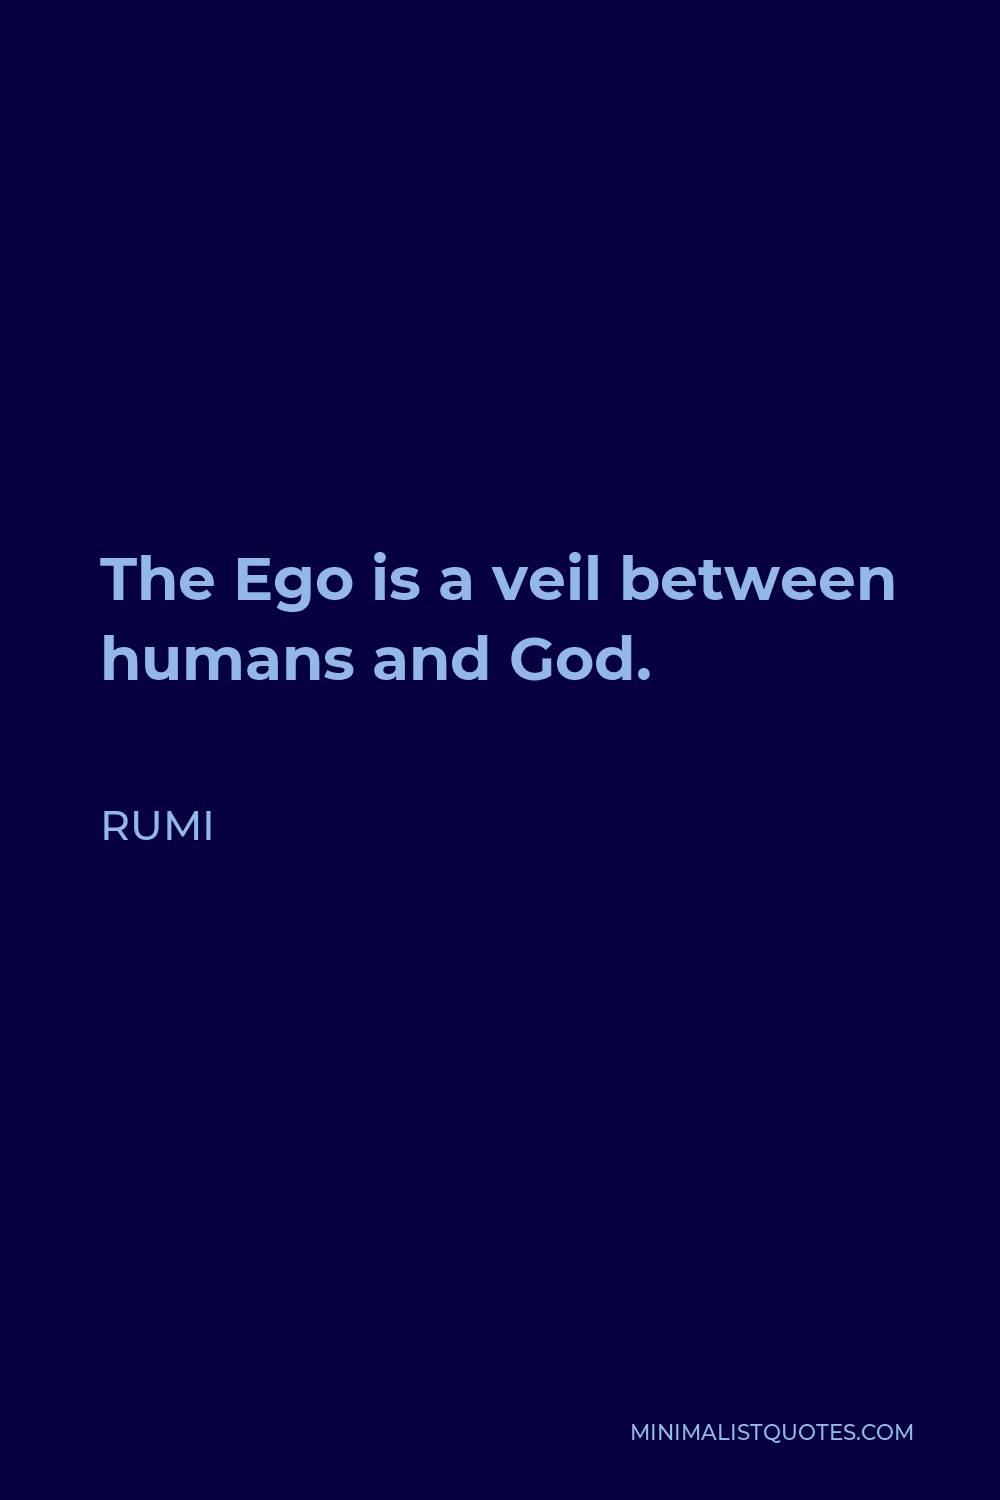 Rumi Quote - The Ego is a veil between humans and God.